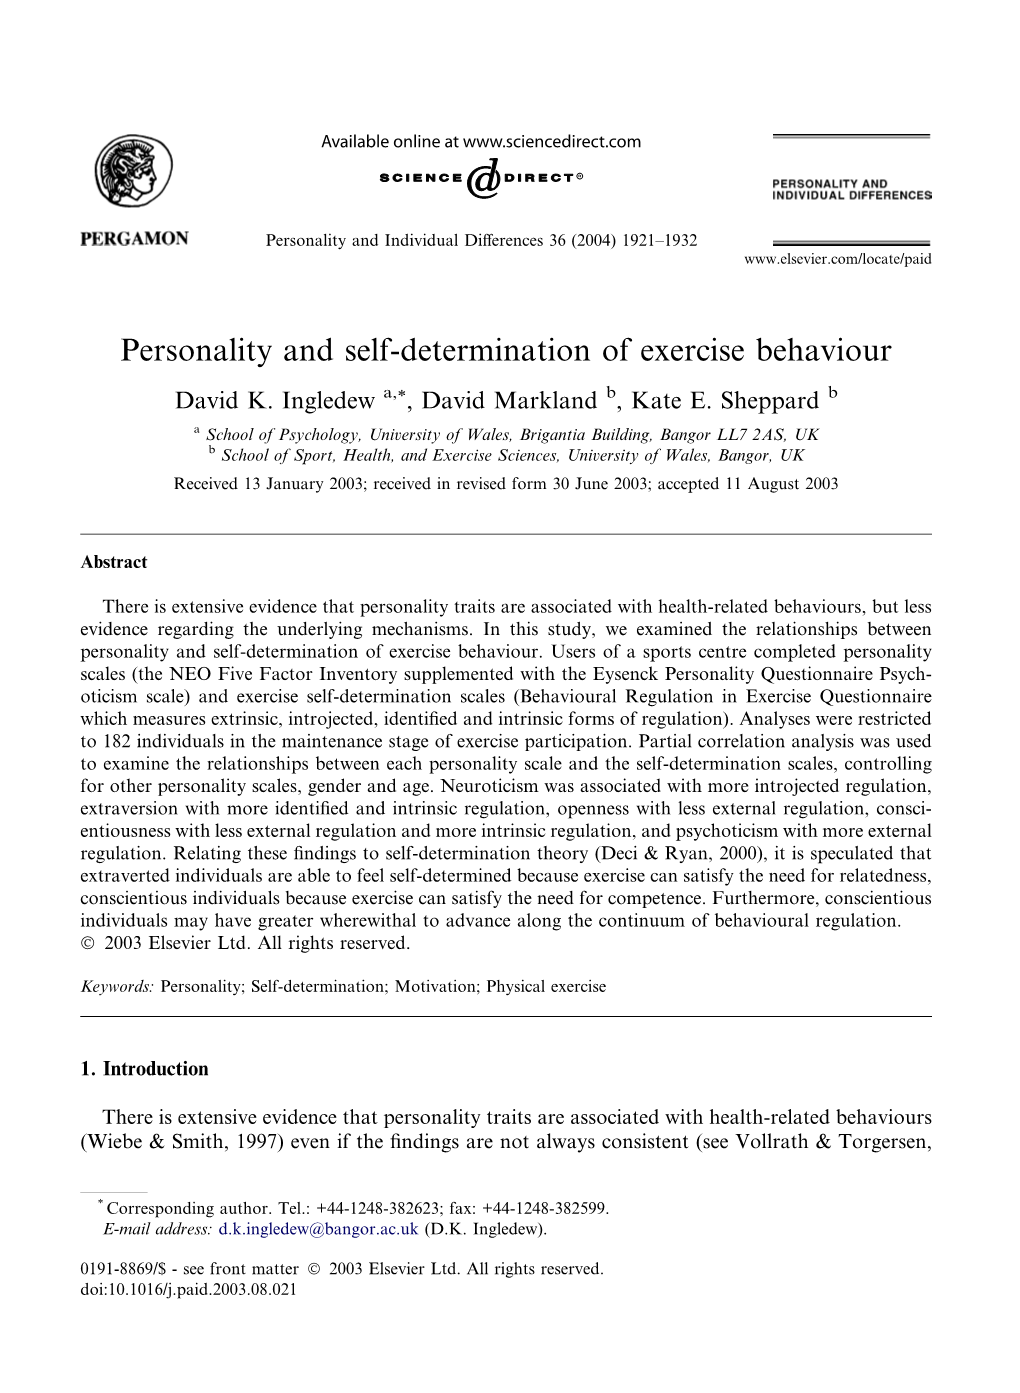 Personality and Self-Determination of Exercise Behaviour David K